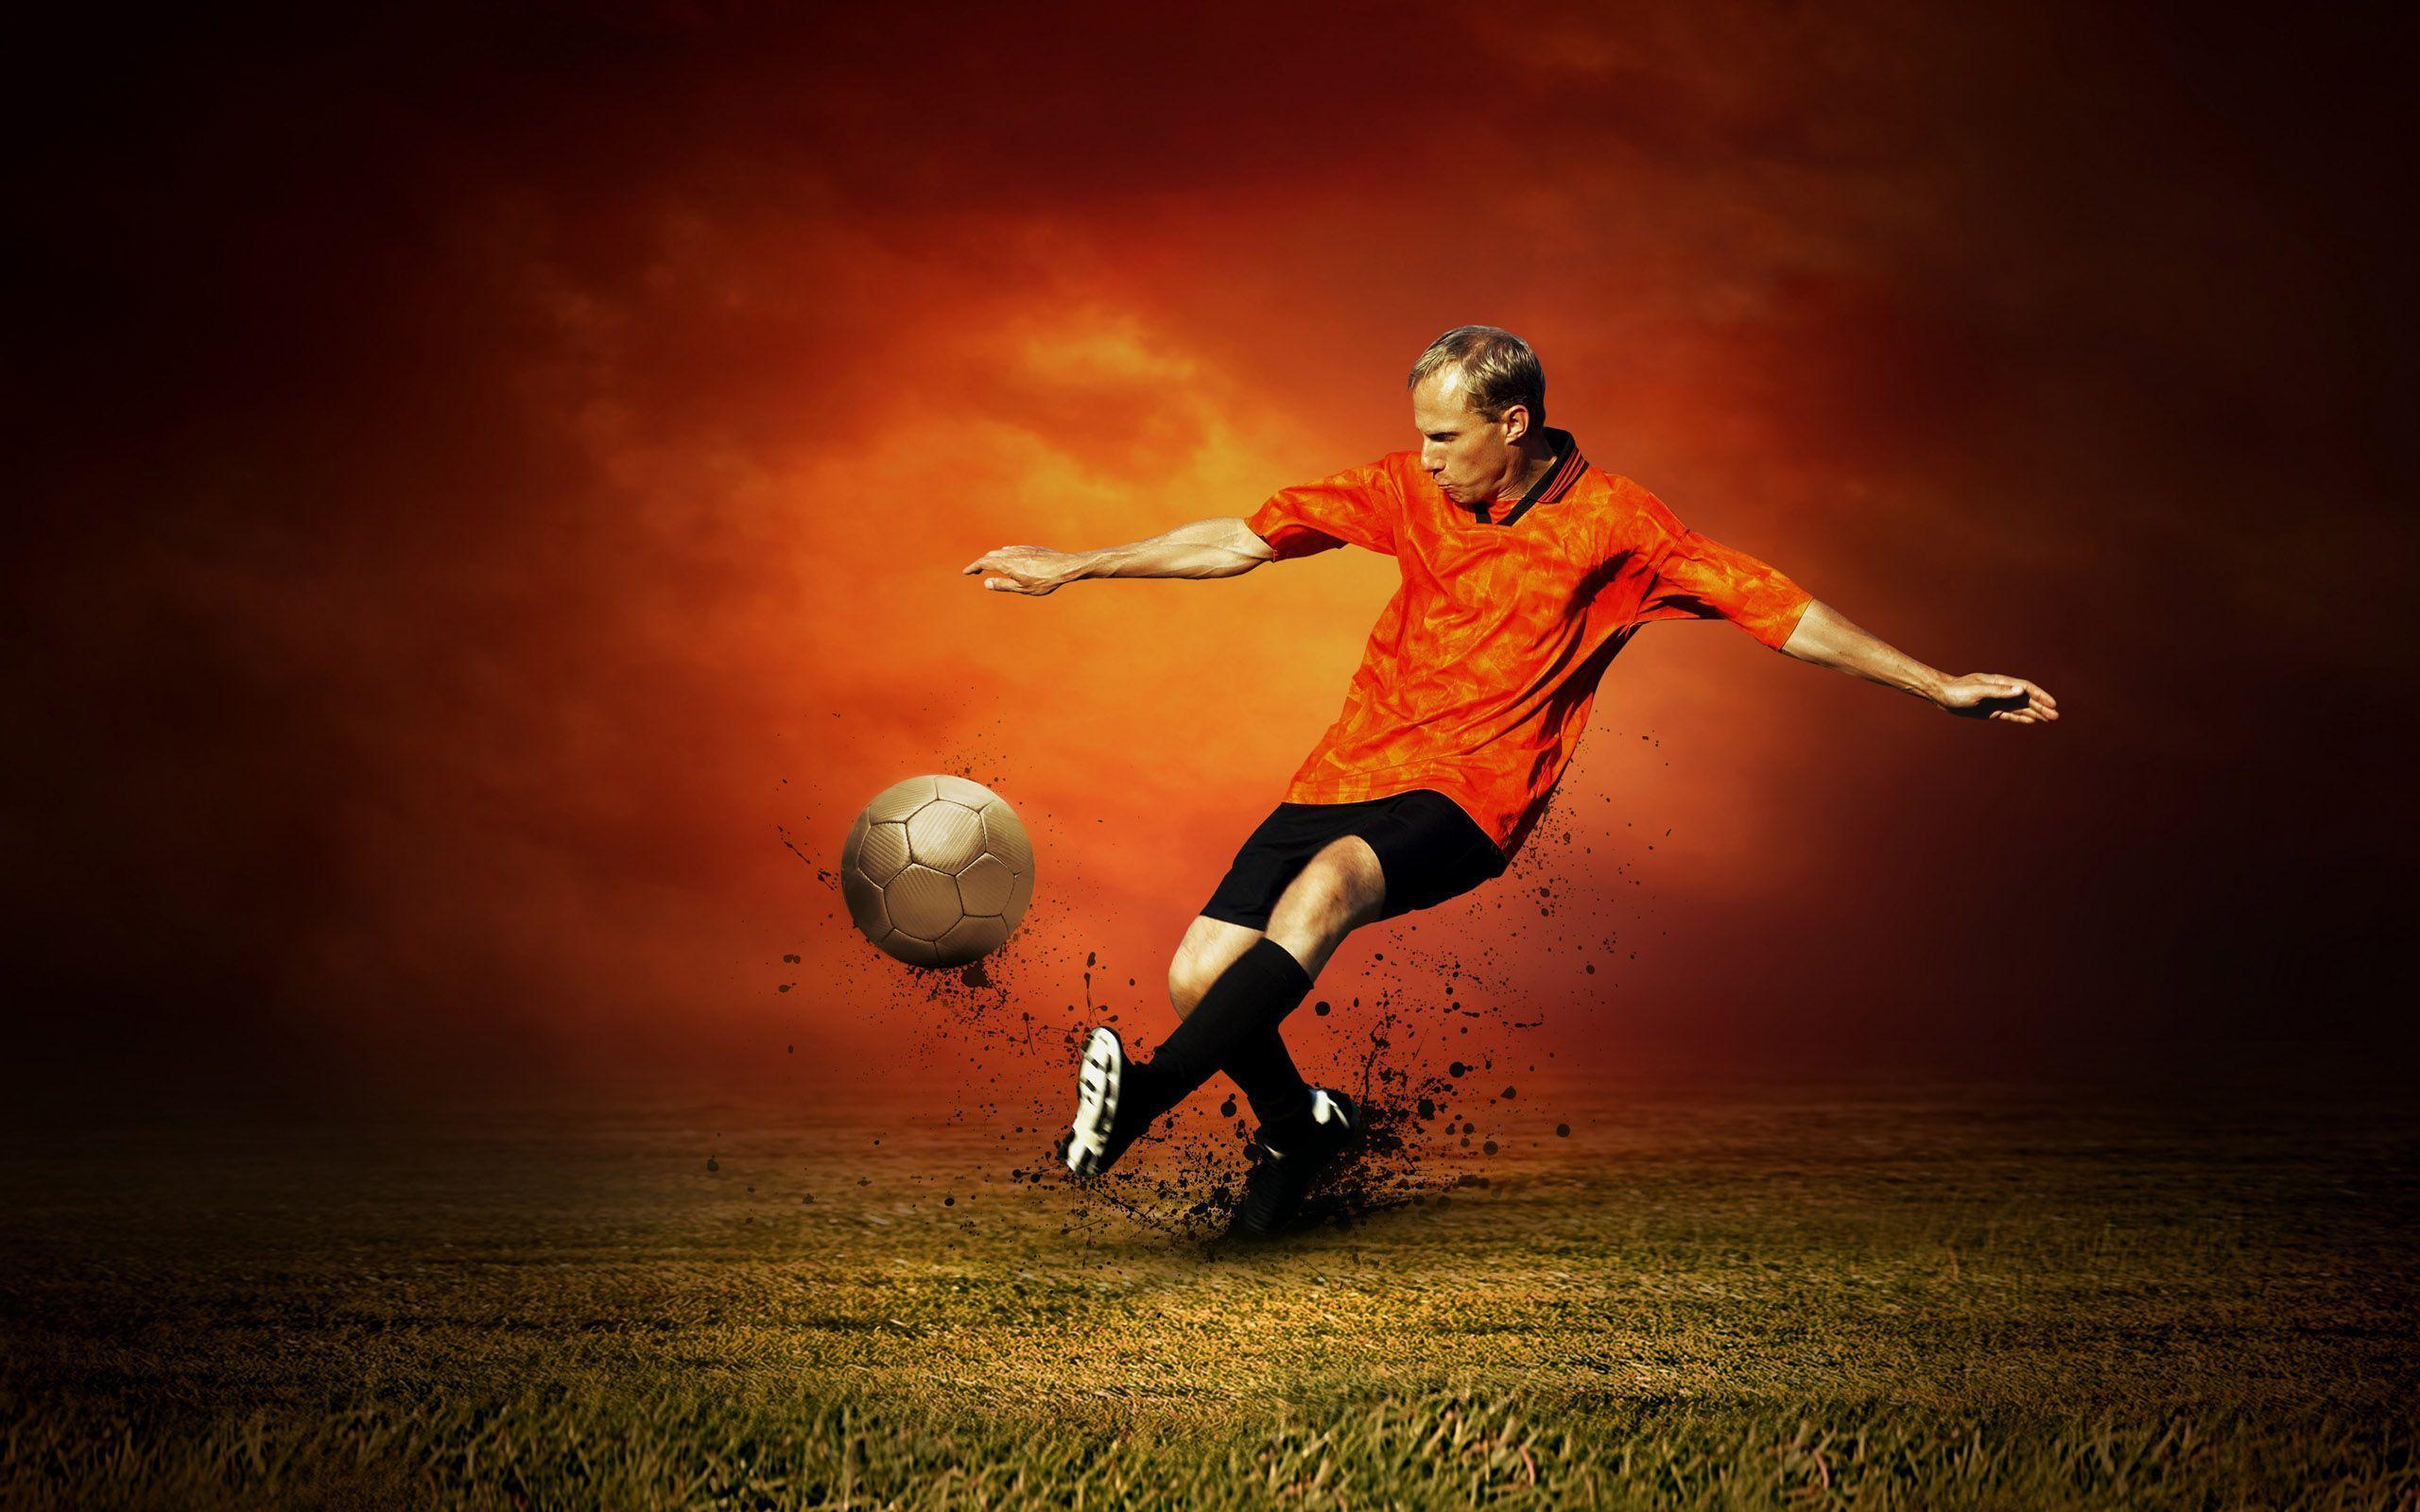 Free Download Cool Soccer Backgrounds 2560x1600 For Your Desktop Mobile Tablet Explore 70 Cool Soccer Backgrounds Cool Soccer Ball Wallpaper Really Cool Soccer Wallpapers